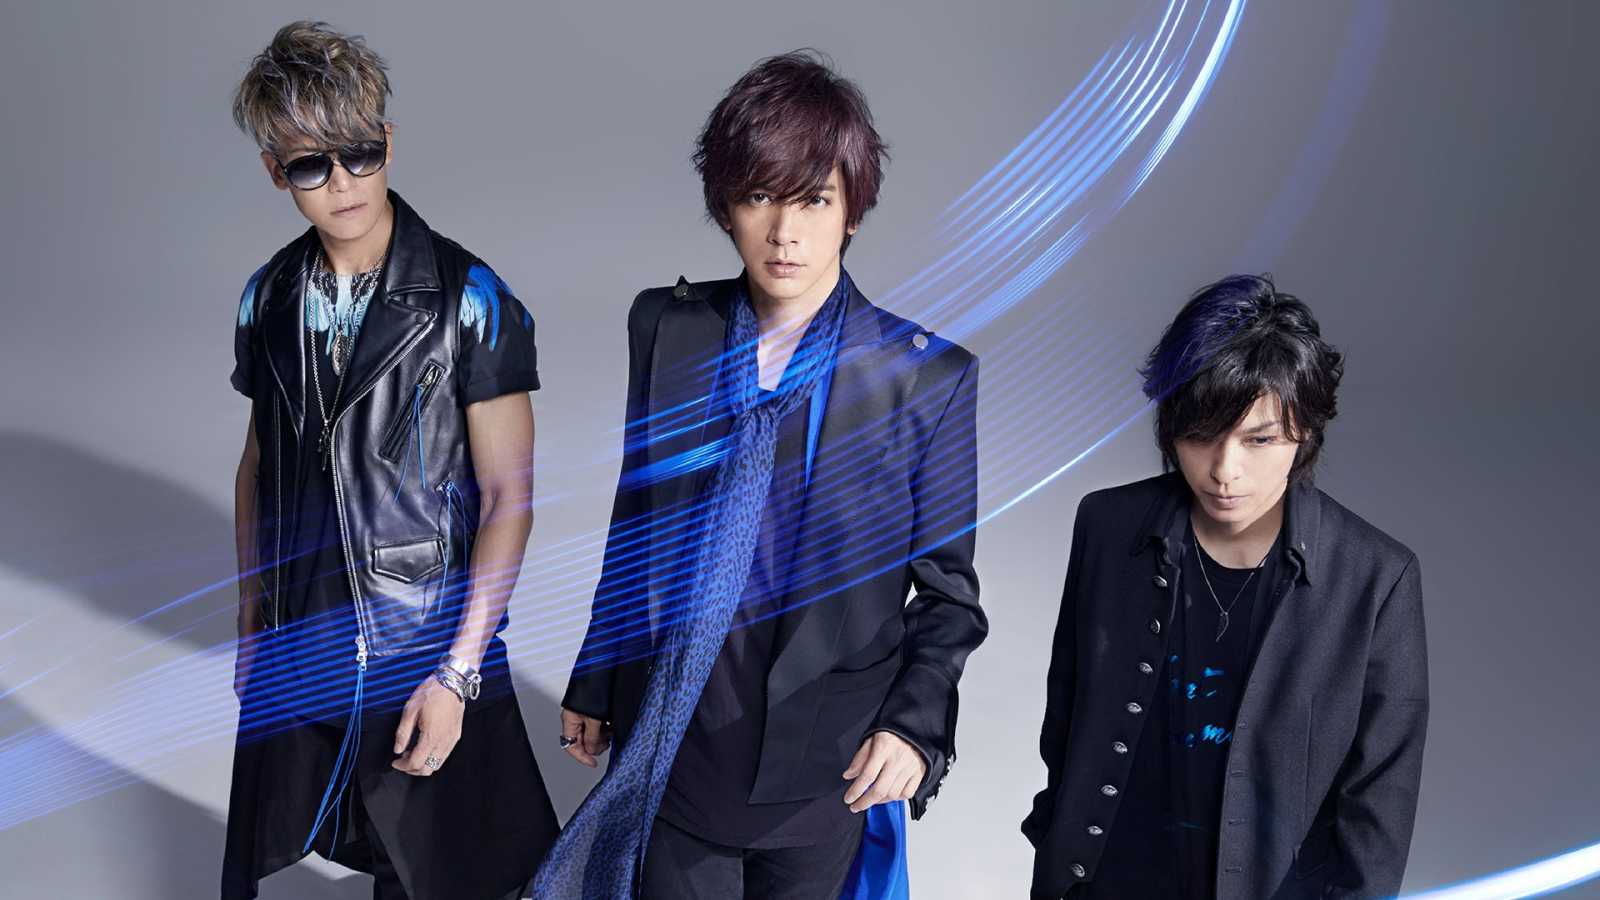 BREAKERZ anuncia novo single © Being inc. All Rights Reserved.